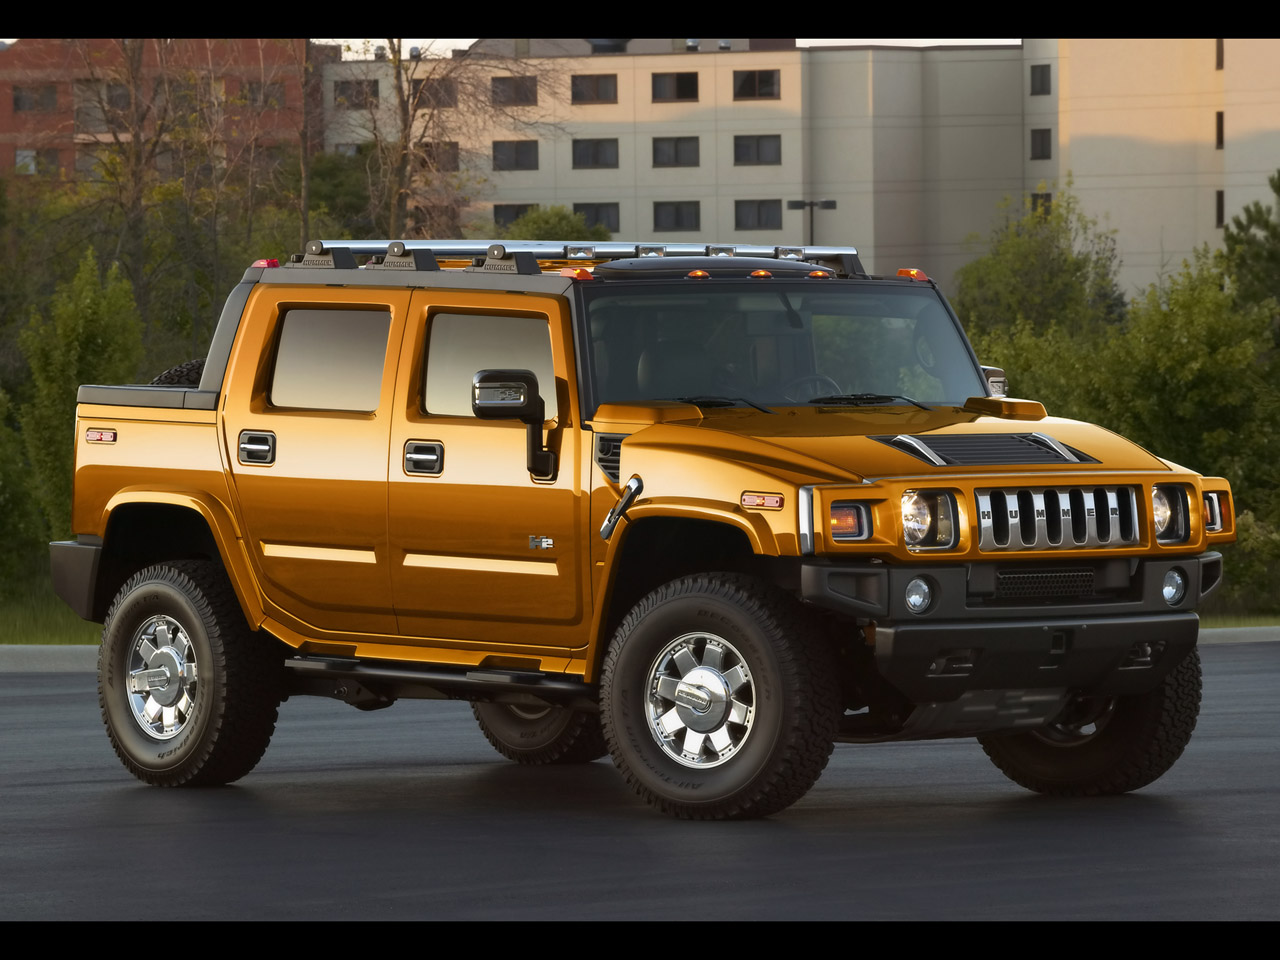 2009 Hummer H2 SUT picture. 30 pictures; No Videos; 2 reviews